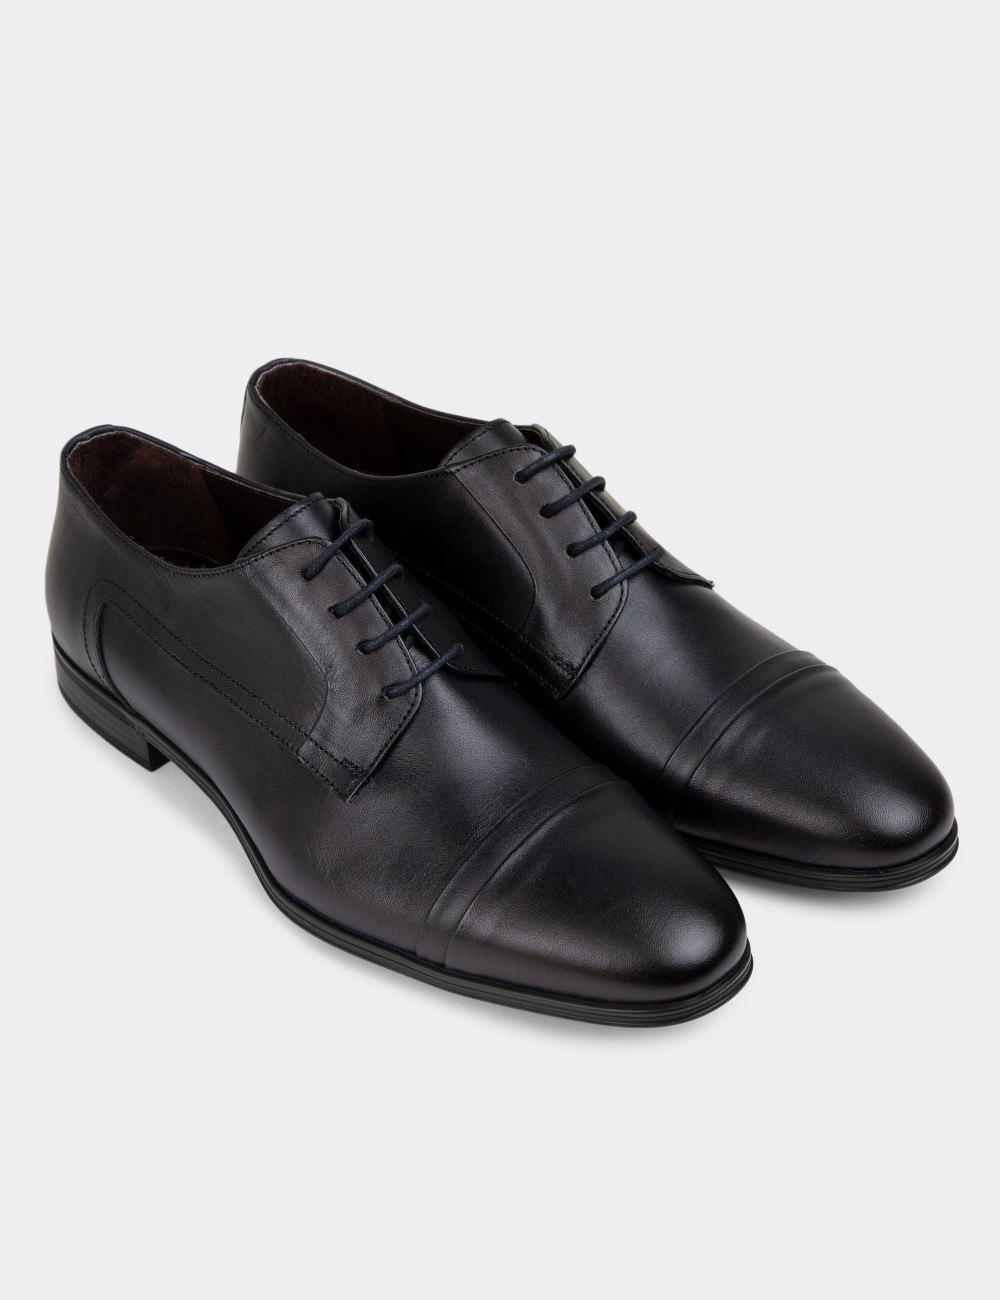 Navy Leather Classic Shoes - 01943MLCVC01